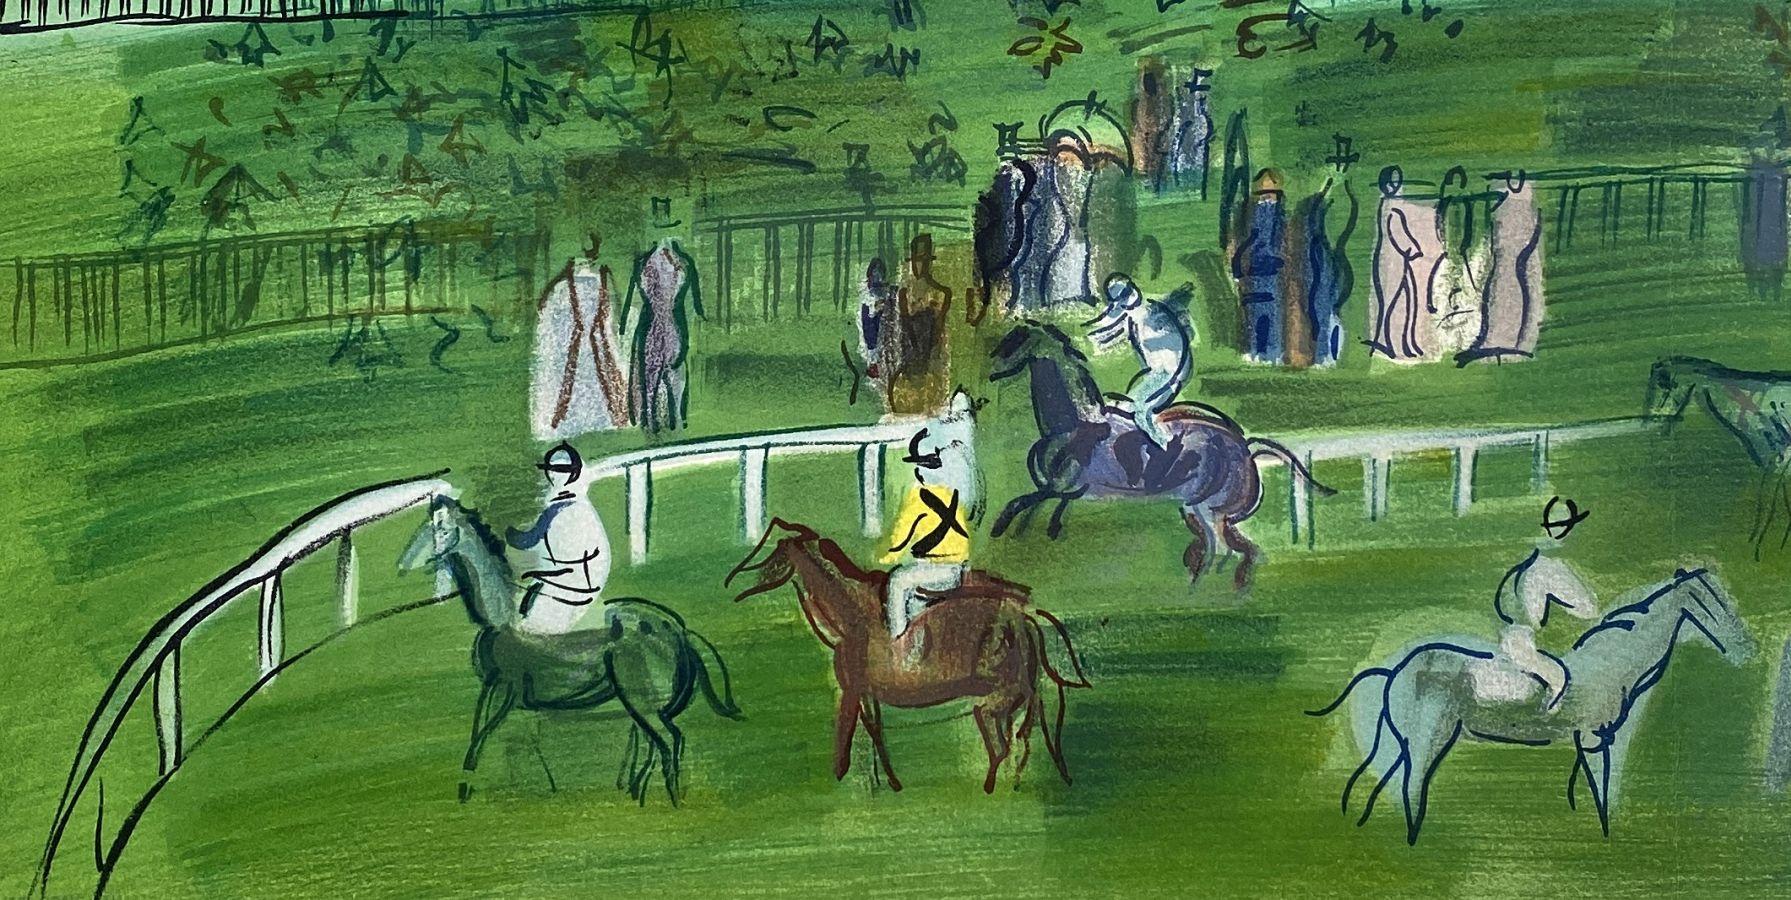 Raoul DUFY (after)
Hippodrome Ascot

Stone lithograph after a painting (Mourlot workshop)
Signed in the plate
On Arches vellum 50 x 105 cm (c. 20 x 41 in)
With fold as published

Excellent condition